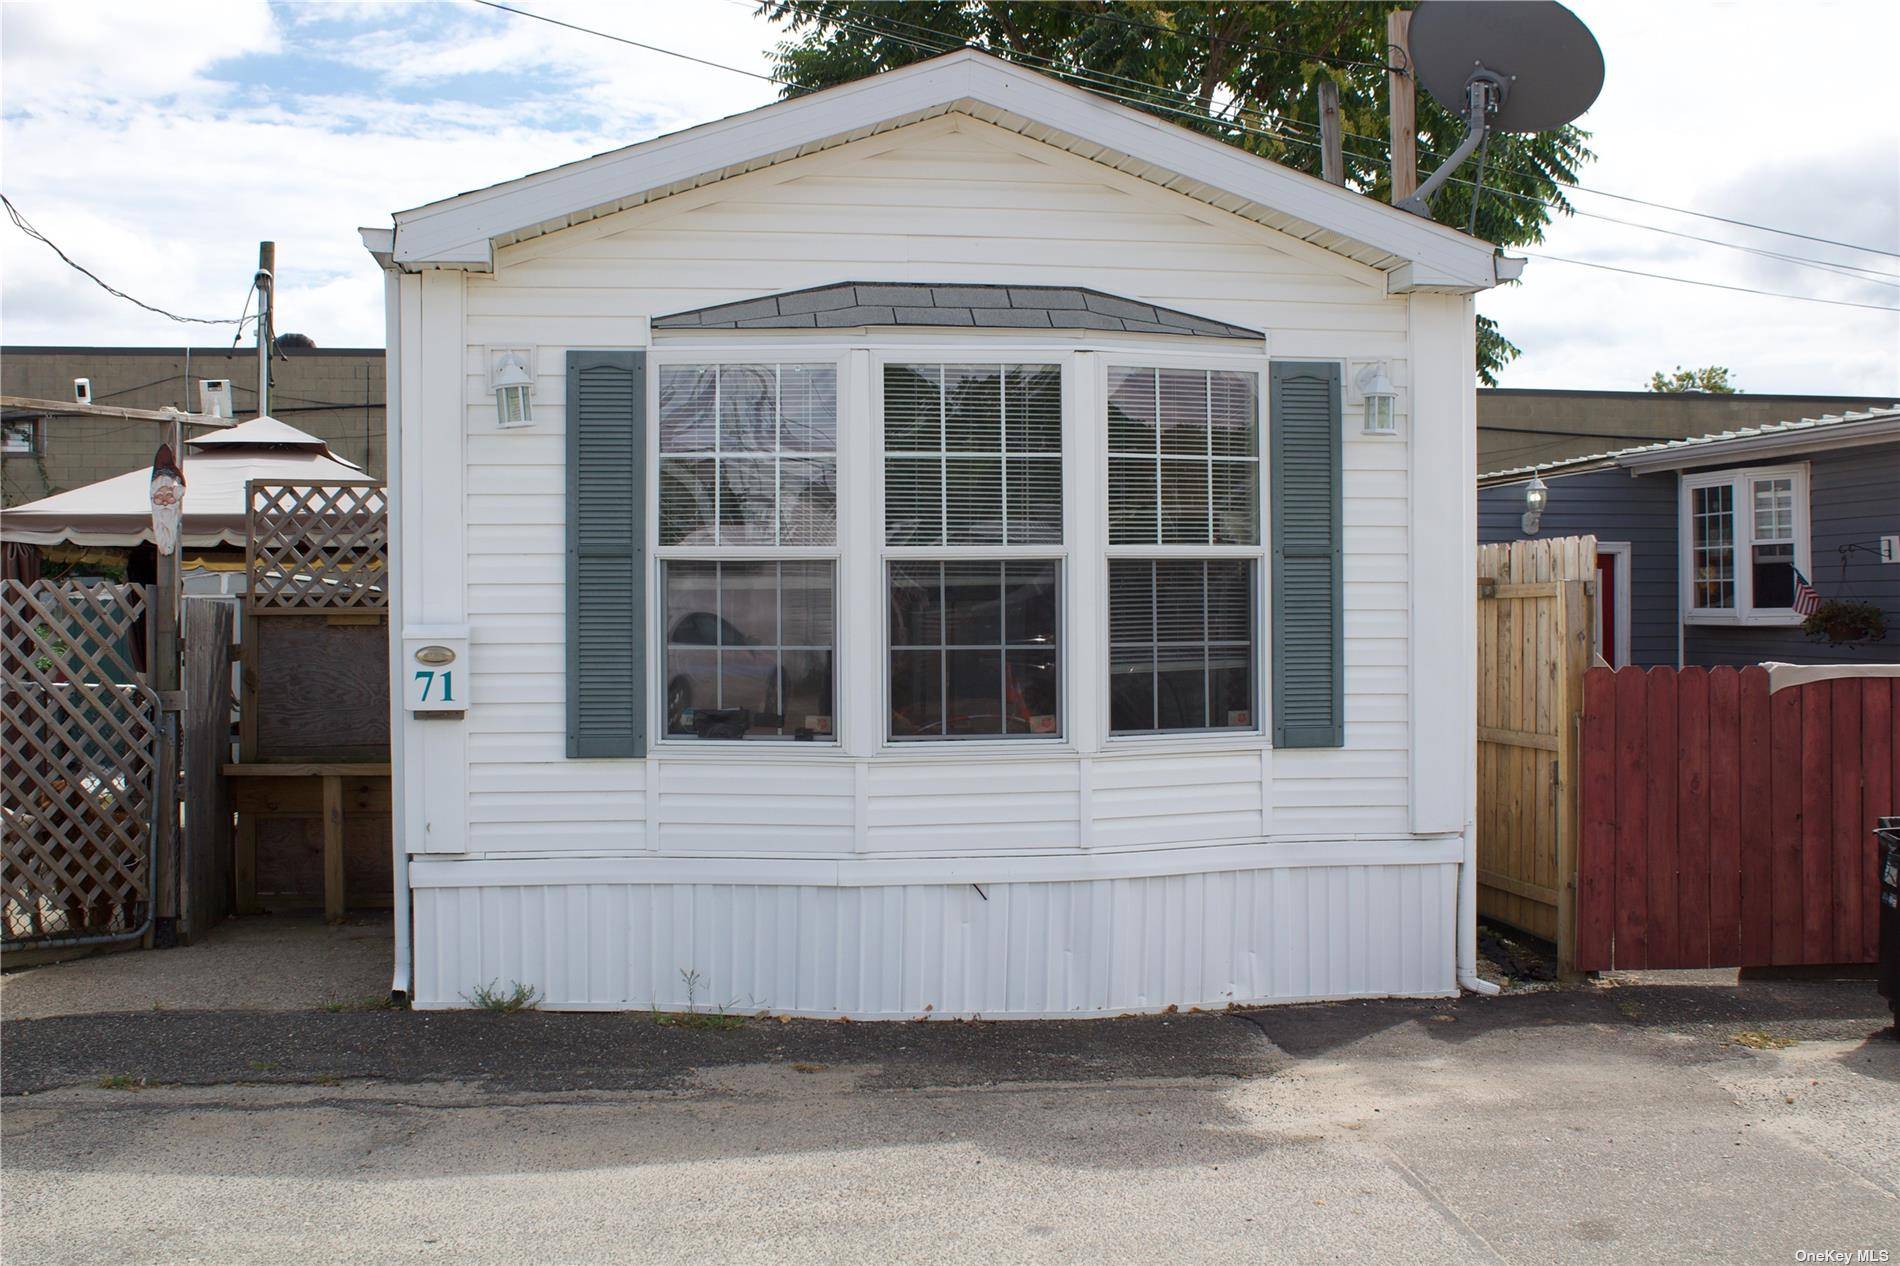 Built in 2004 and updated in 2021, this adorable 2 bedroom home is waiting for its next owner !